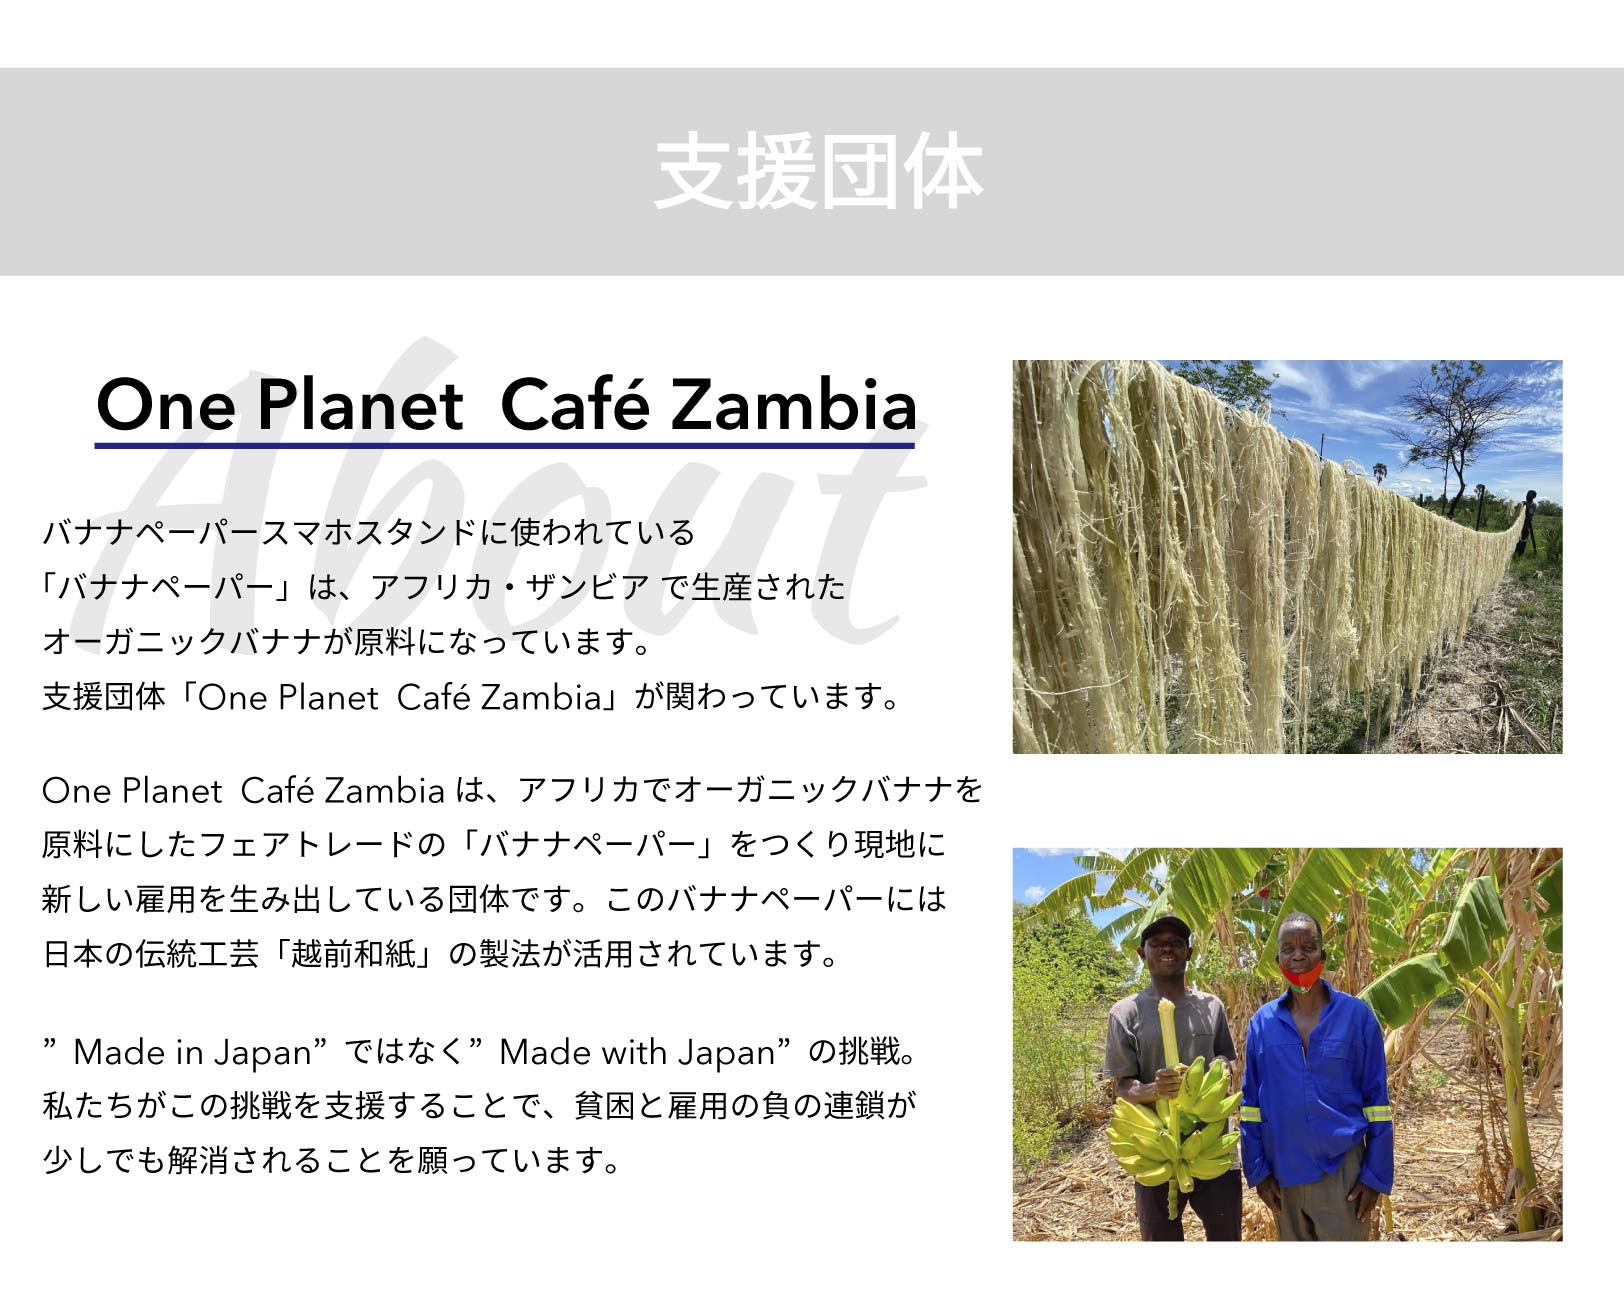 One Planet Cafe Zambia